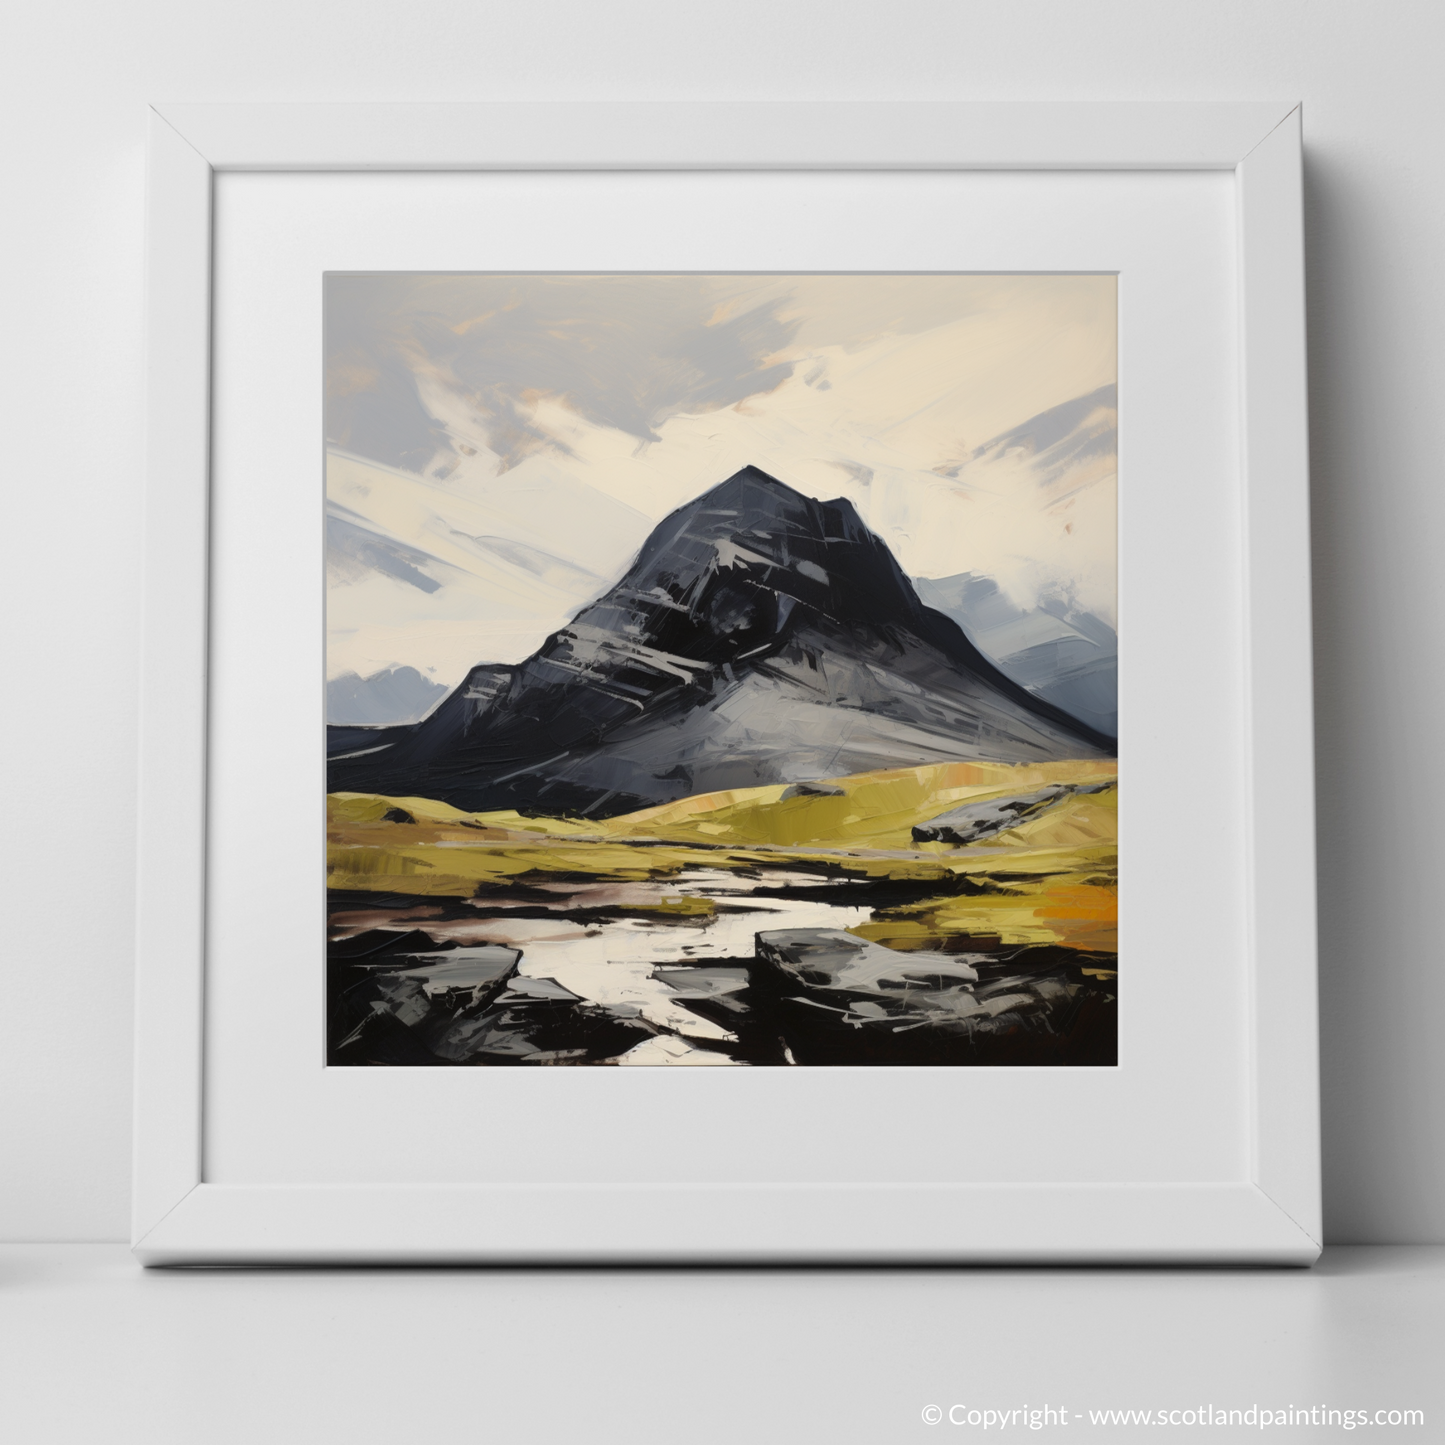 Art Print of Ben More Assynt, Sutherland with a white frame